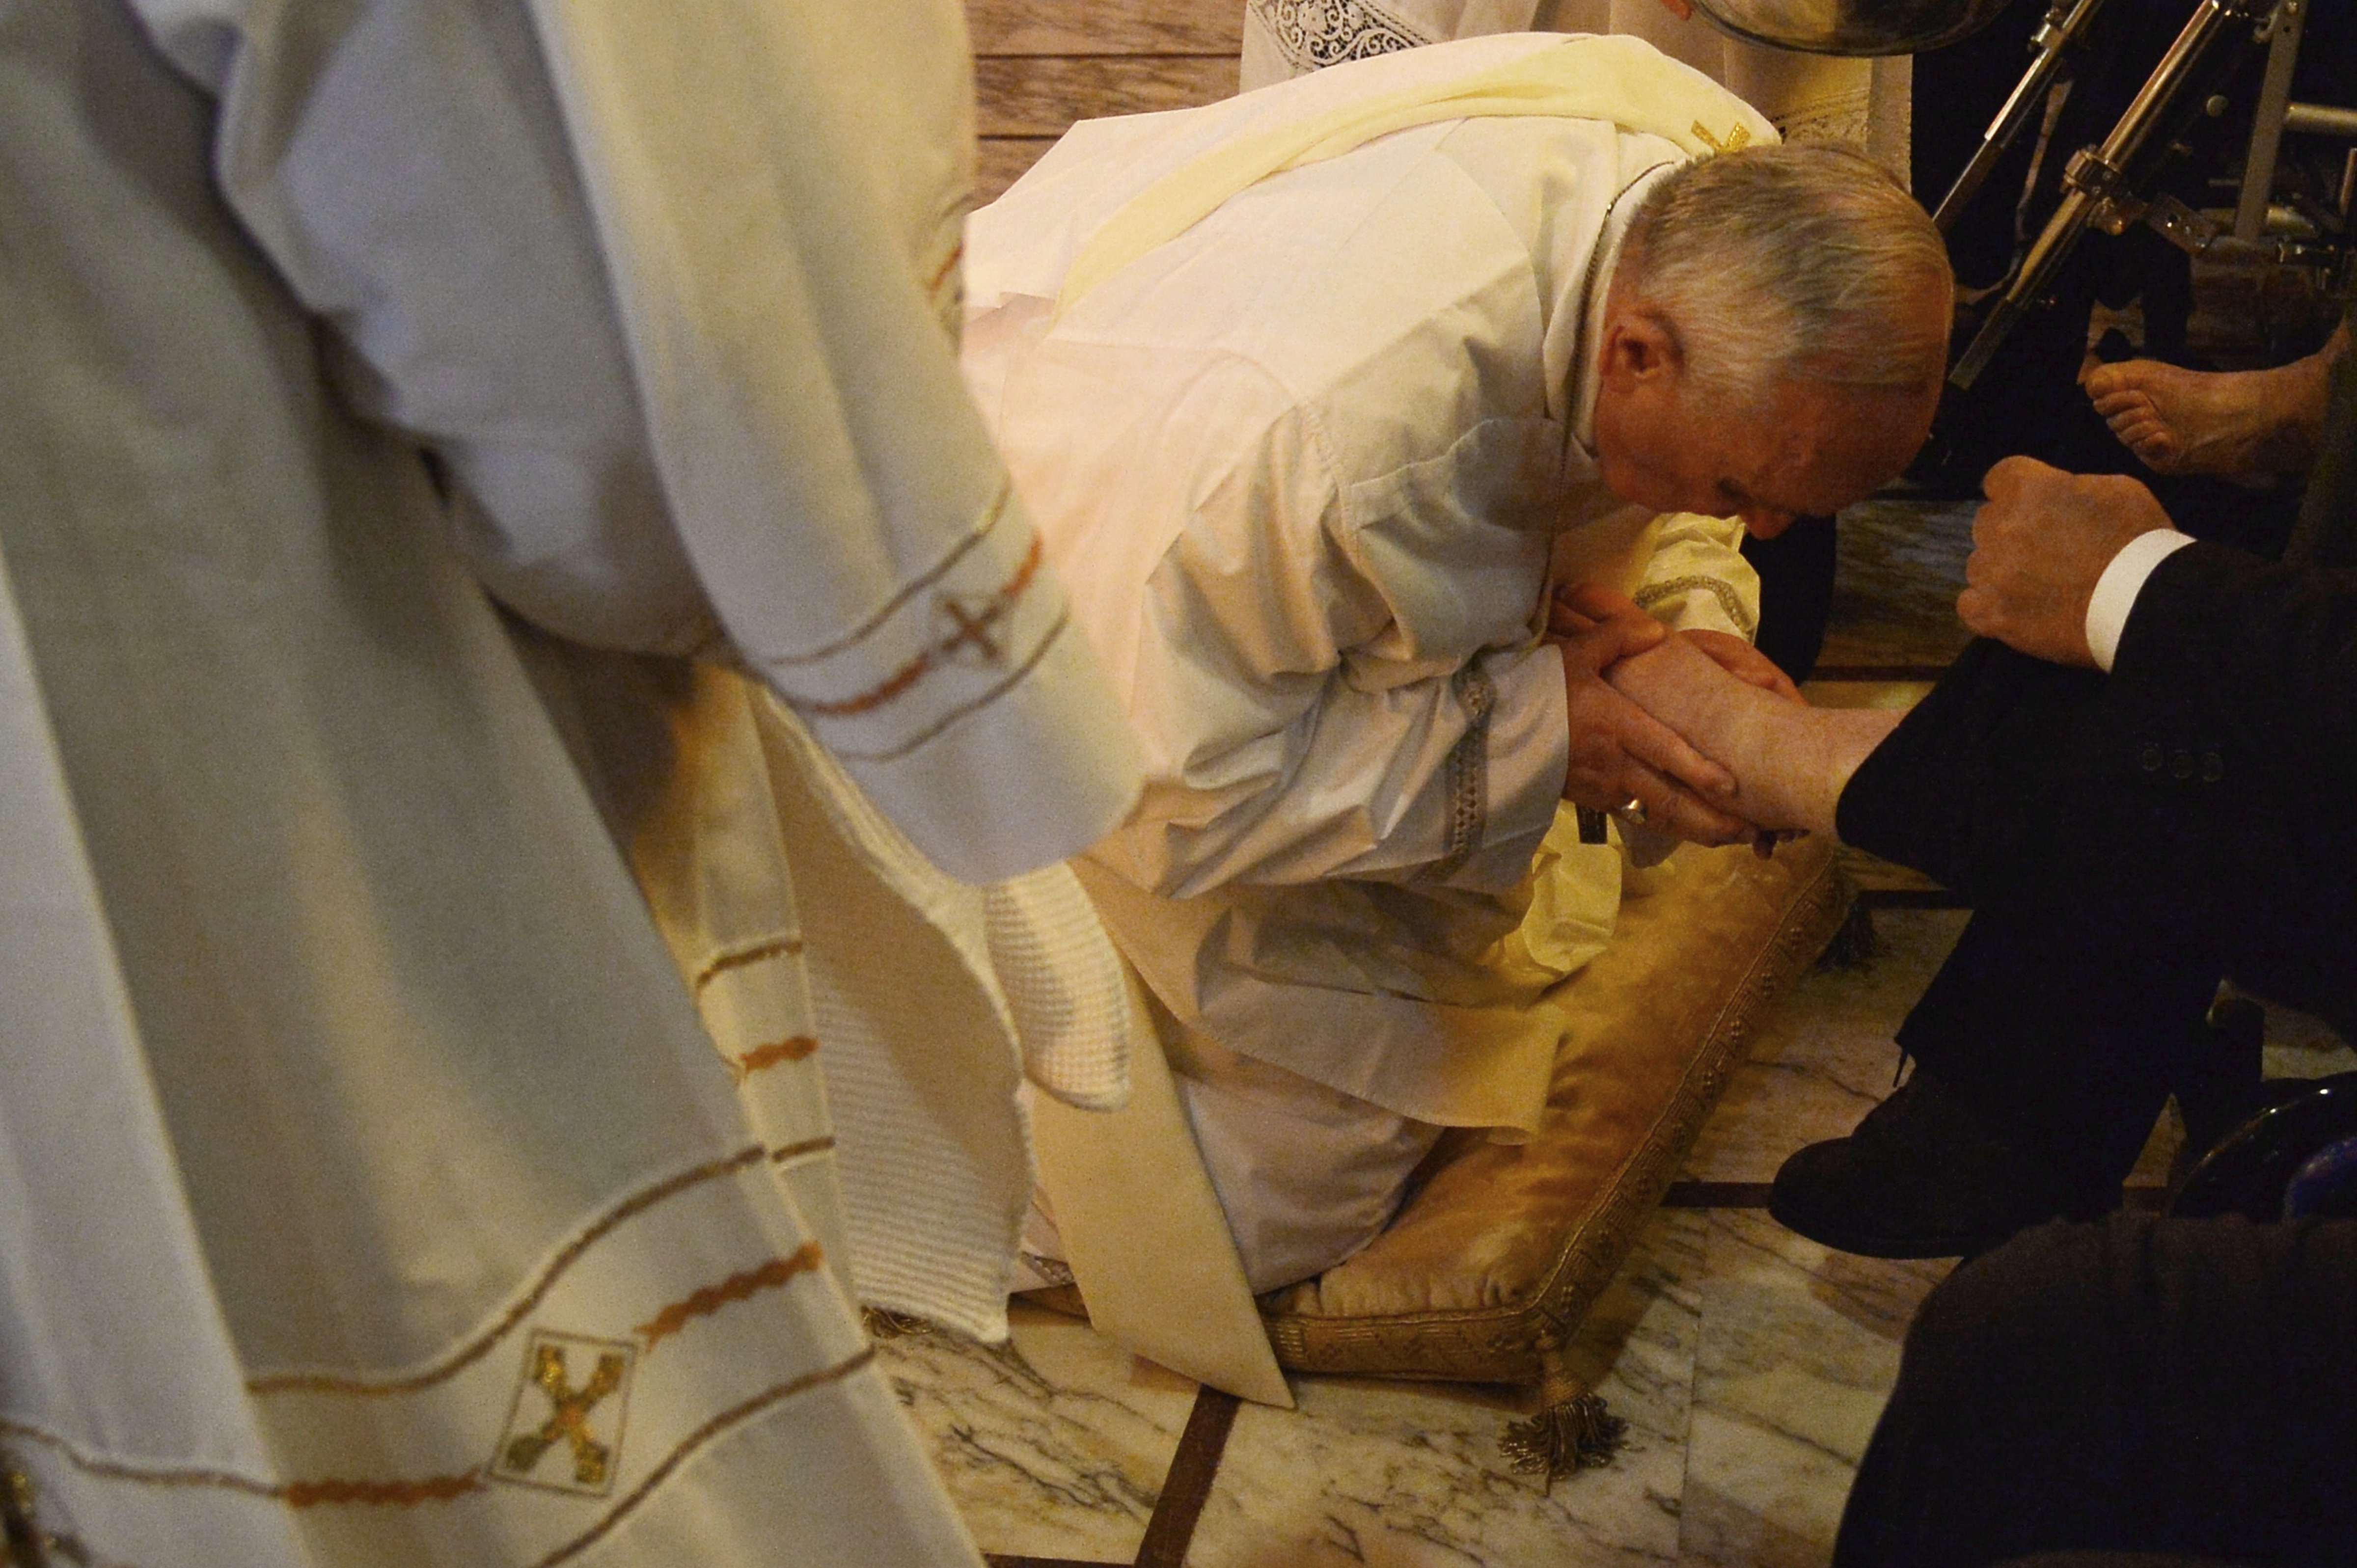 Pope Francis performs the traditional washing of the feet during a visit at a center for disabled people as part of Holy Thursday and Holy Week, April 17, 2014 in Rome. (ALBERTO PIZZOLI&mdash;AFP/Getty Images)